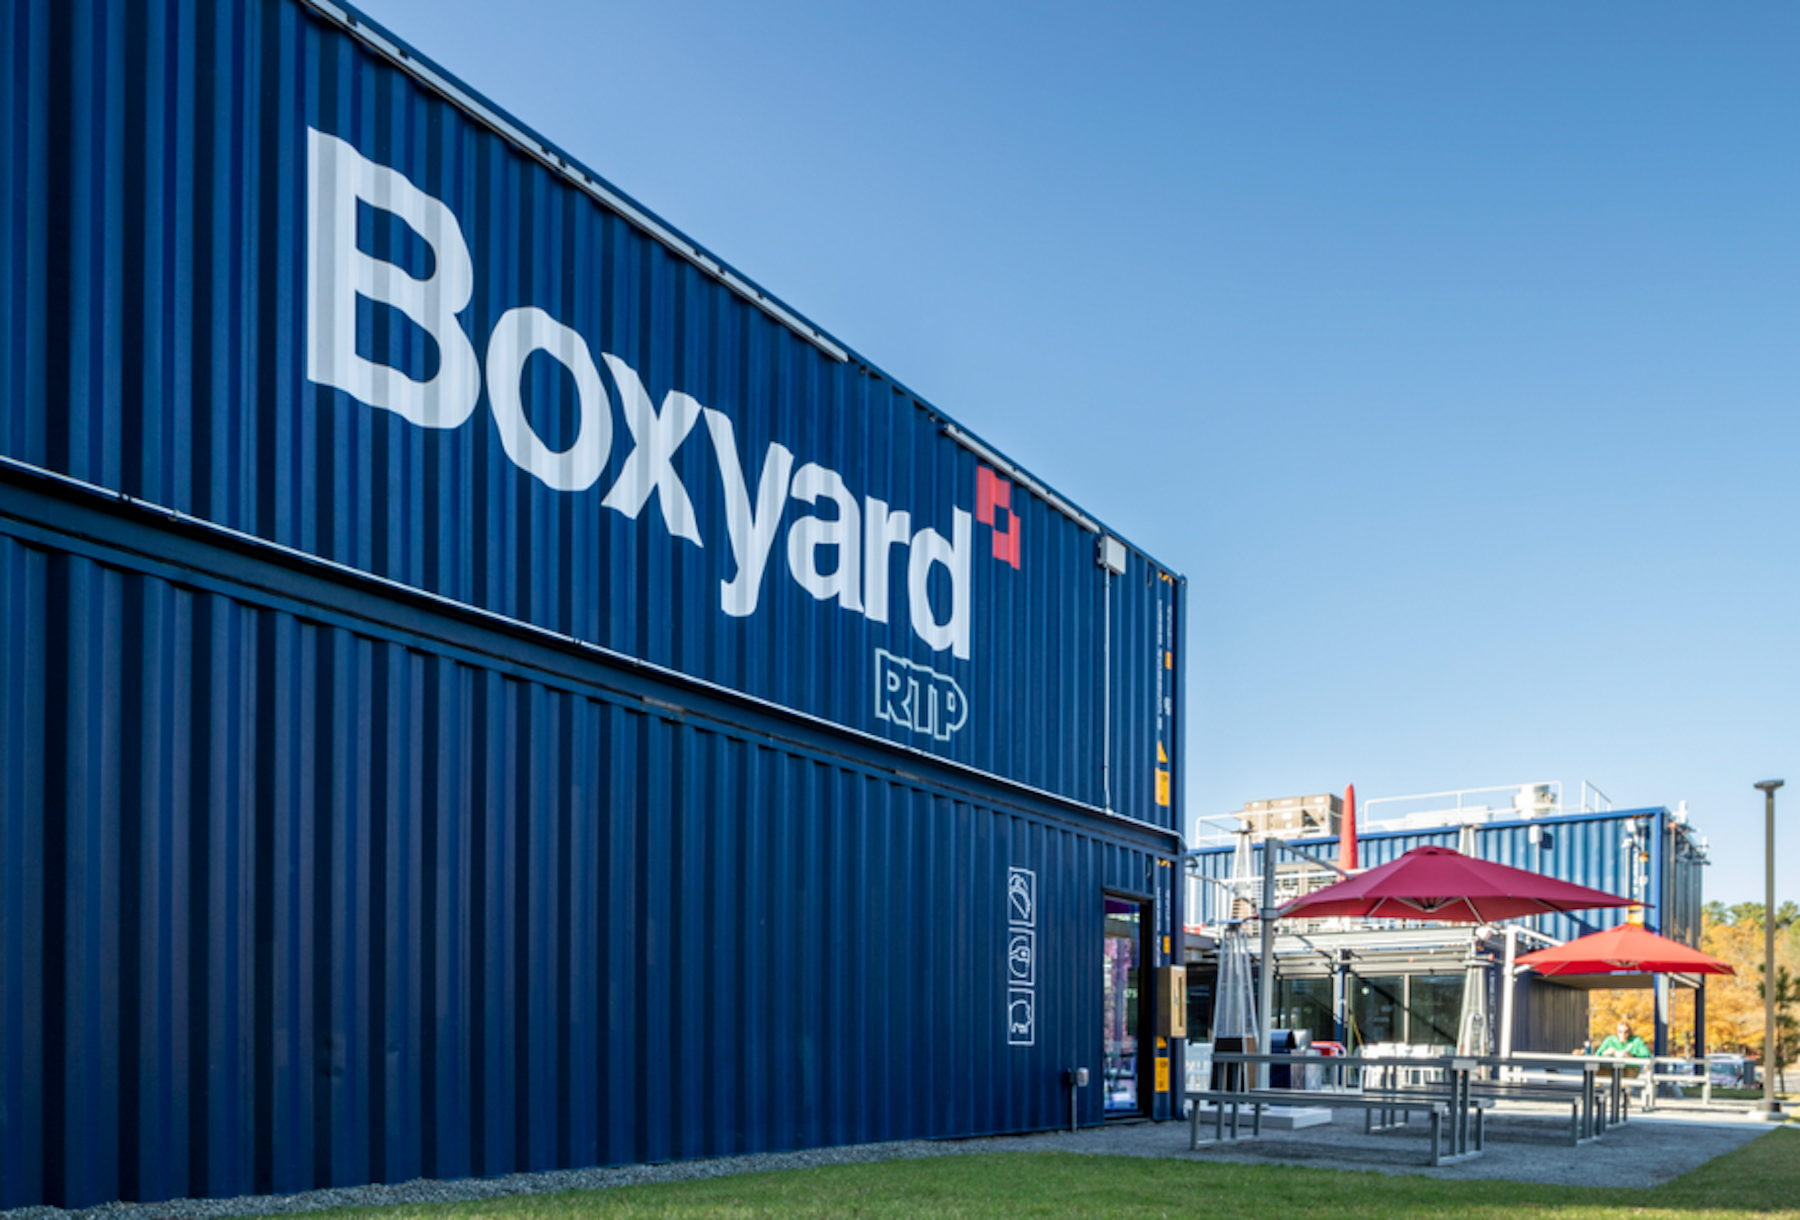 Boxyard RTP lunchtime happy hour ext